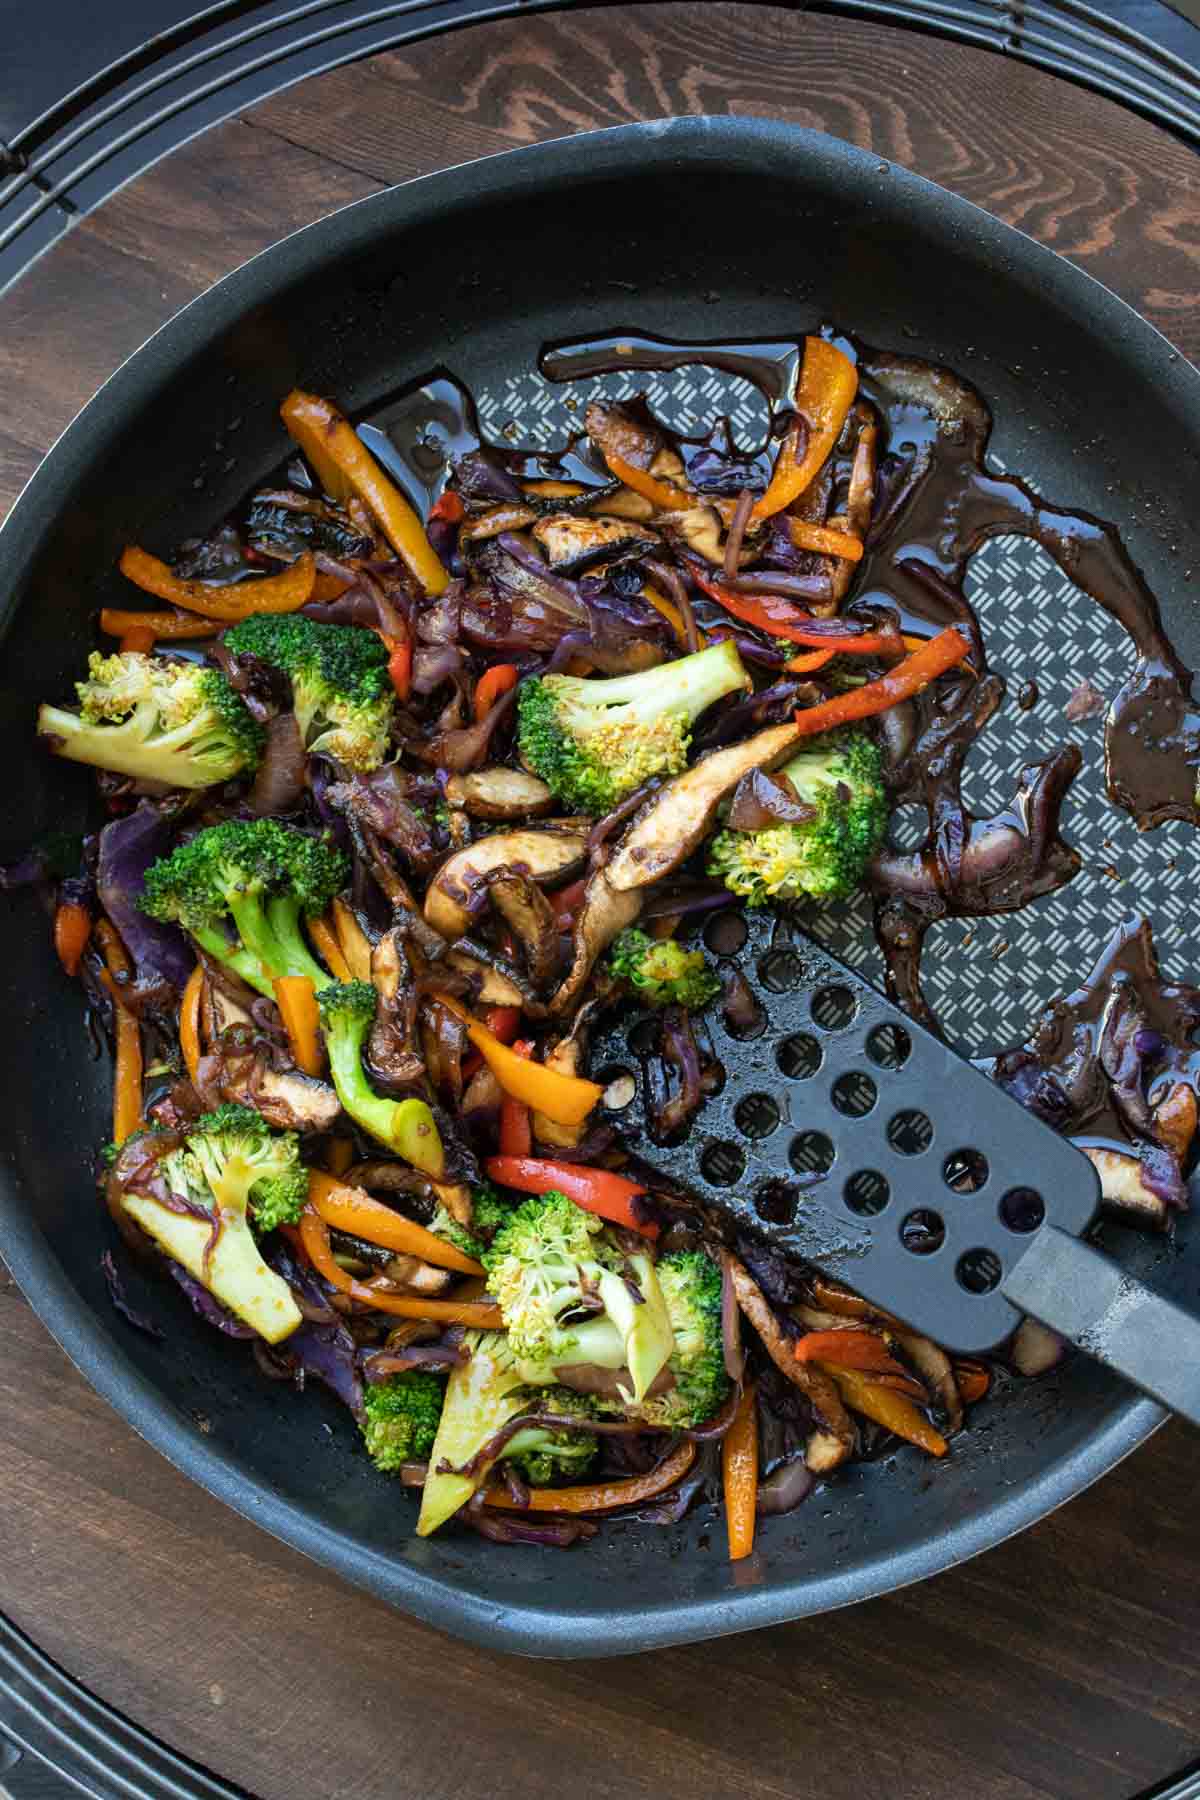 Teriyaki sauce and sliced veggies cooking in a pan being stirred with a spatula.